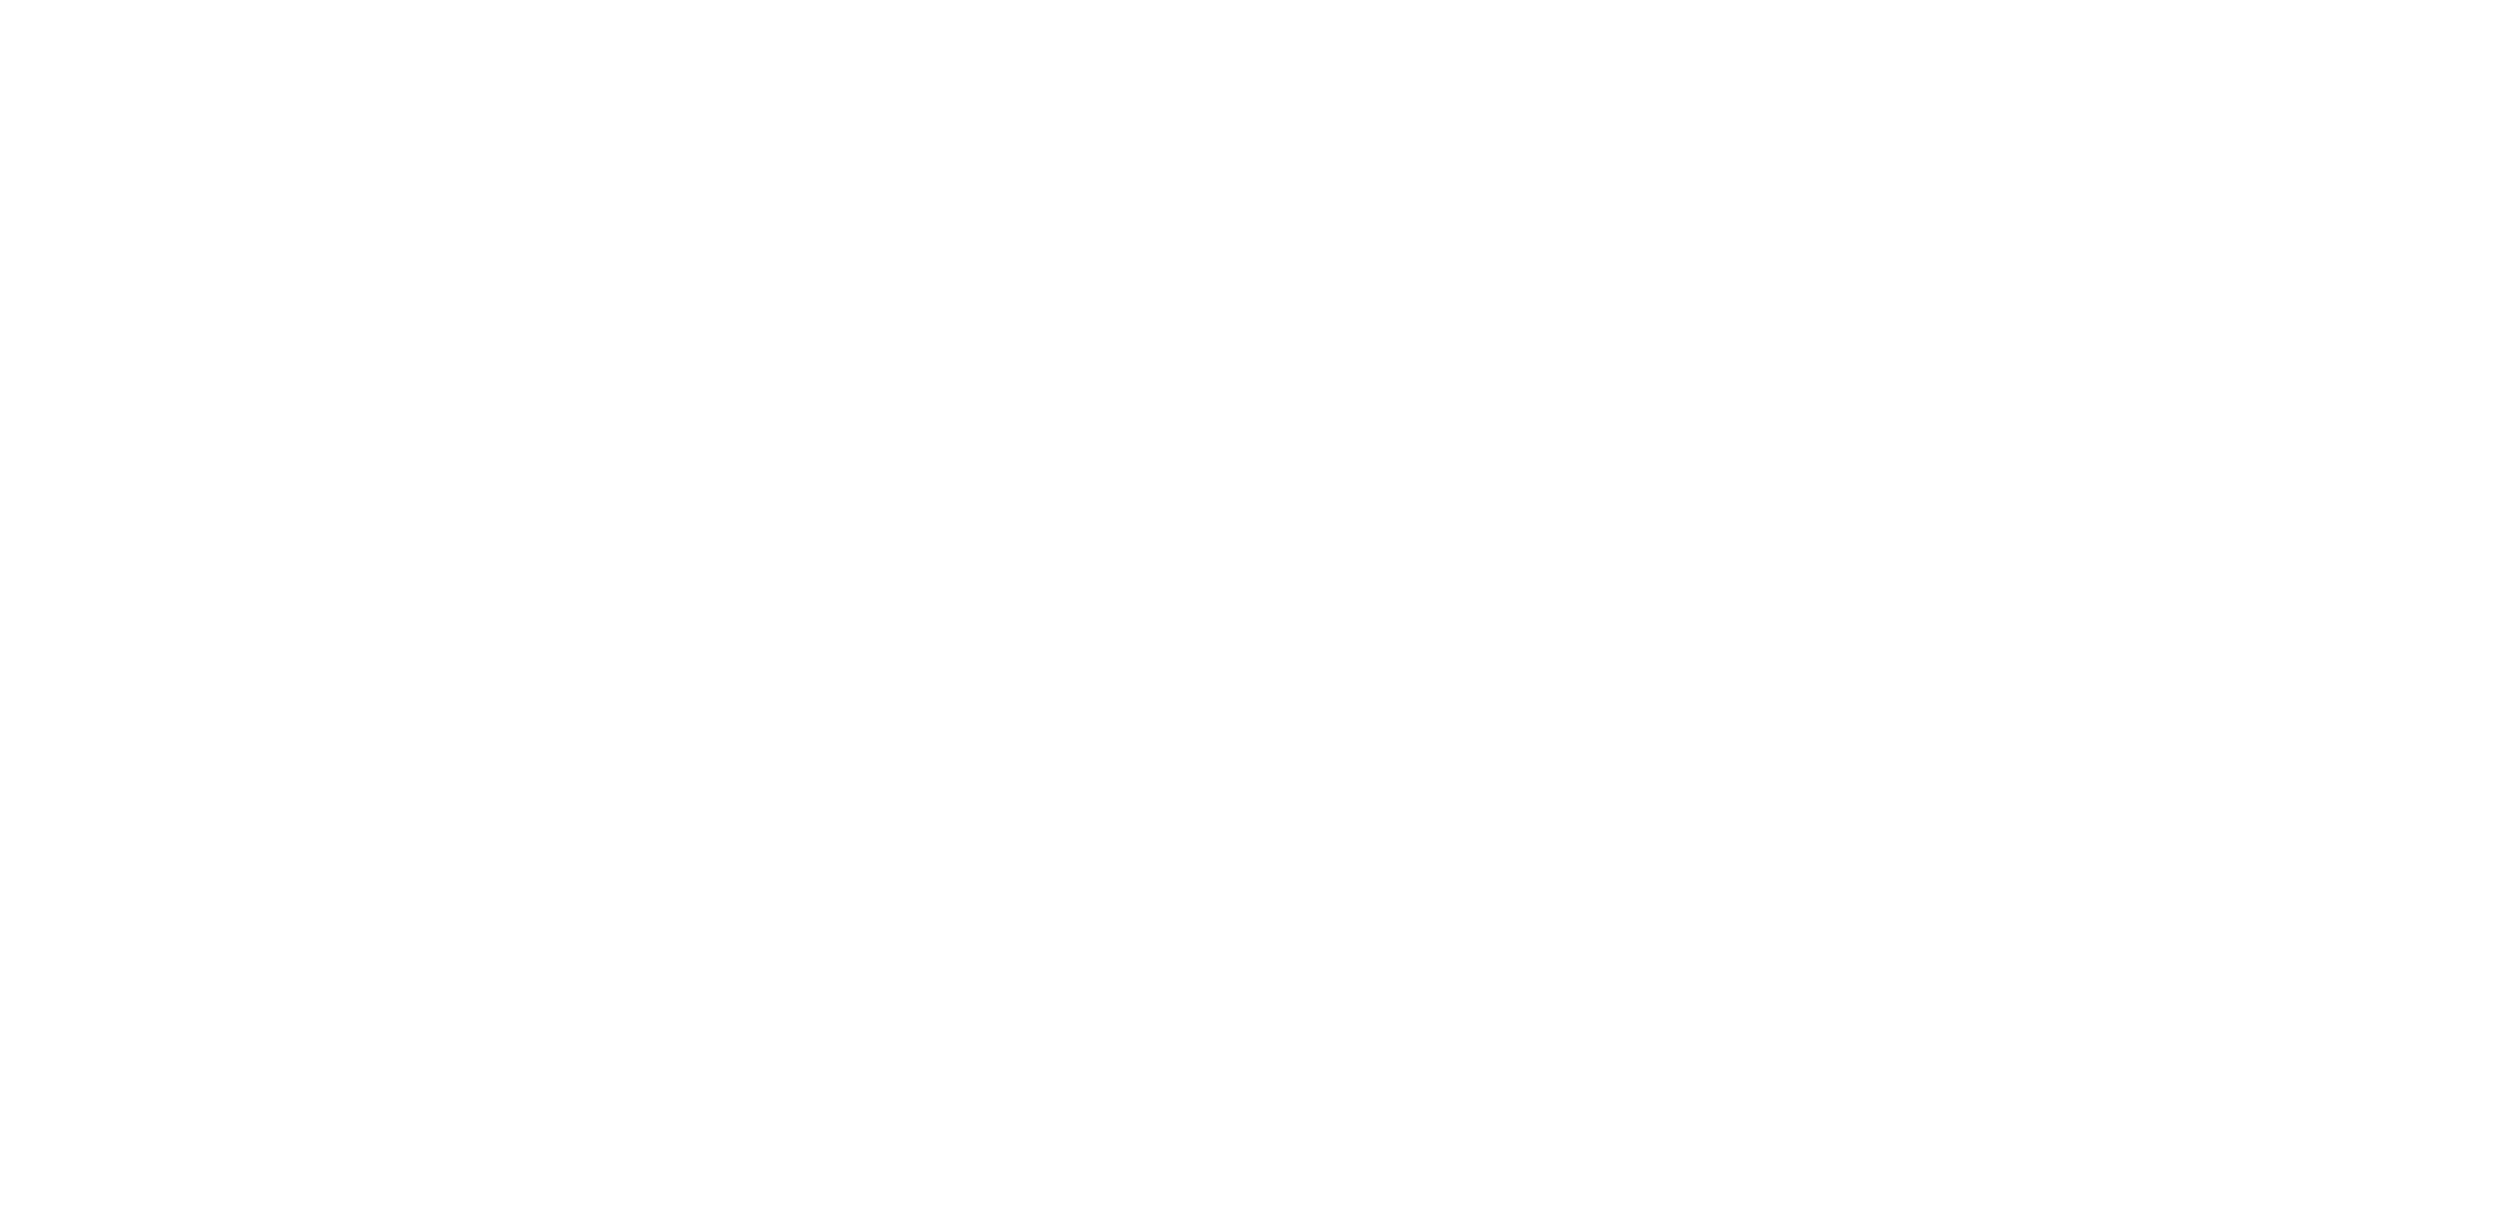 Charm City Care Connection